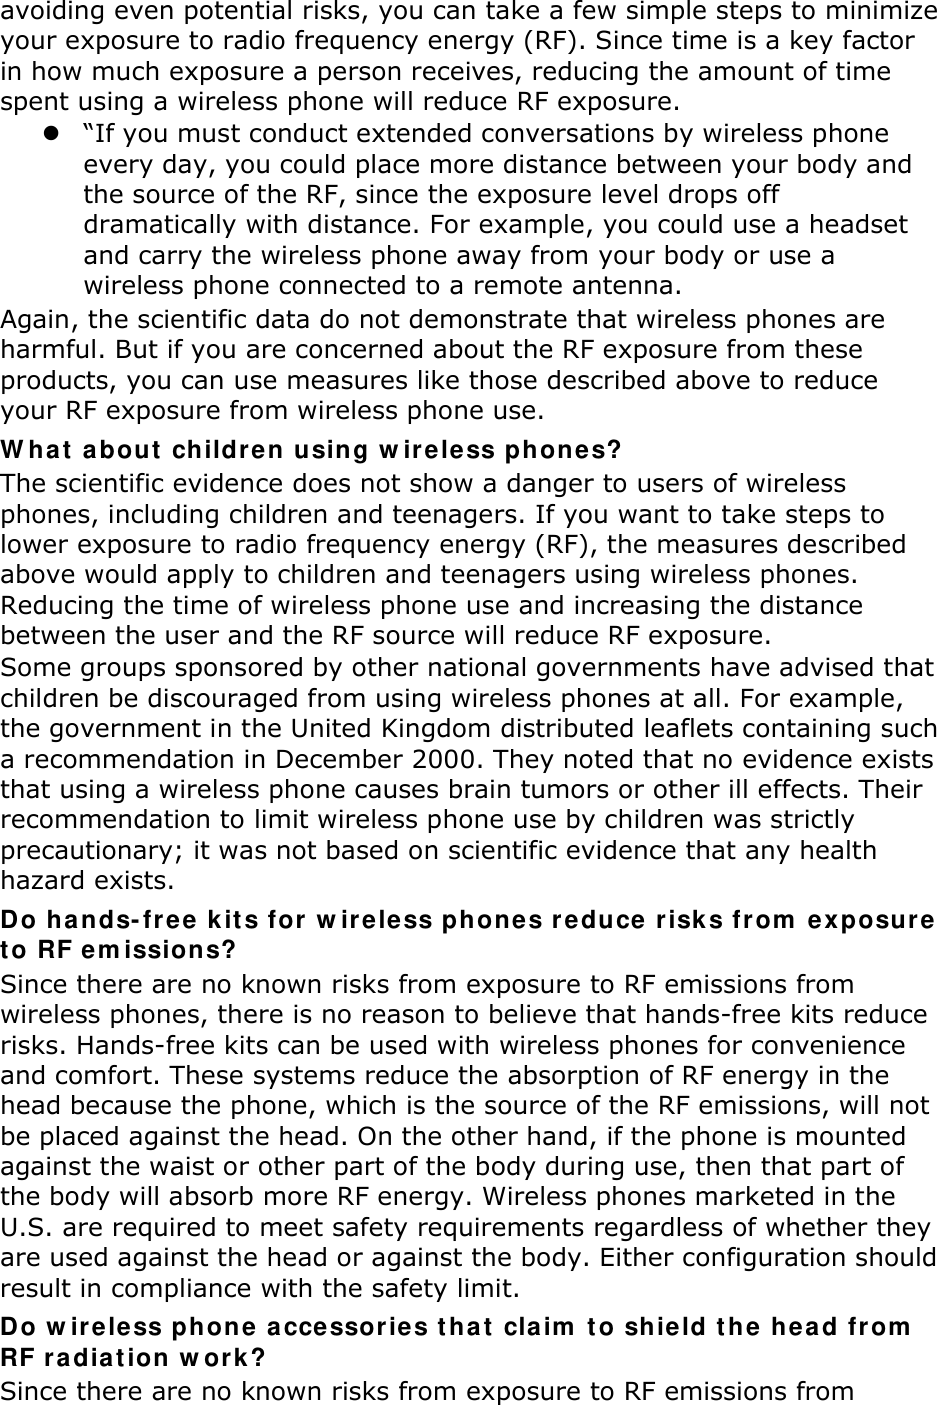 avoiding even potential risks, you can take a few simple steps to minimize your exposure to radio frequency energy (RF). Since time is a key factor in how much exposure a person receives, reducing the amount of time spent using a wireless phone will reduce RF exposure.  “If you must conduct extended conversations by wireless phone every day, you could place more distance between your body and the source of the RF, since the exposure level drops off dramatically with distance. For example, you could use a headset and carry the wireless phone away from your body or use a wireless phone connected to a remote antenna. Again, the scientific data do not demonstrate that wireless phones are harmful. But if you are concerned about the RF exposure from these products, you can use measures like those described above to reduce your RF exposure from wireless phone use. What about children using wireless phones? The scientific evidence does not show a danger to users of wireless phones, including children and teenagers. If you want to take steps to lower exposure to radio frequency energy (RF), the measures described above would apply to children and teenagers using wireless phones. Reducing the time of wireless phone use and increasing the distance between the user and the RF source will reduce RF exposure. Some groups sponsored by other national governments have advised that children be discouraged from using wireless phones at all. For example, the government in the United Kingdom distributed leaflets containing such a recommendation in December 2000. They noted that no evidence exists that using a wireless phone causes brain tumors or other ill effects. Their recommendation to limit wireless phone use by children was strictly precautionary; it was not based on scientific evidence that any health hazard exists.   Do hands-free kits for wireless phones reduce risks from exposure to RF emissions? Since there are no known risks from exposure to RF emissions from wireless phones, there is no reason to believe that hands-free kits reduce risks. Hands-free kits can be used with wireless phones for convenience and comfort. These systems reduce the absorption of RF energy in the head because the phone, which is the source of the RF emissions, will not be placed against the head. On the other hand, if the phone is mounted against the waist or other part of the body during use, then that part of the body will absorb more RF energy. Wireless phones marketed in the U.S. are required to meet safety requirements regardless of whether they are used against the head or against the body. Either configuration should result in compliance with the safety limit. Do wireless phone accessories that claim to shield the head from RF radiation work? Since there are no known risks from exposure to RF emissions from 